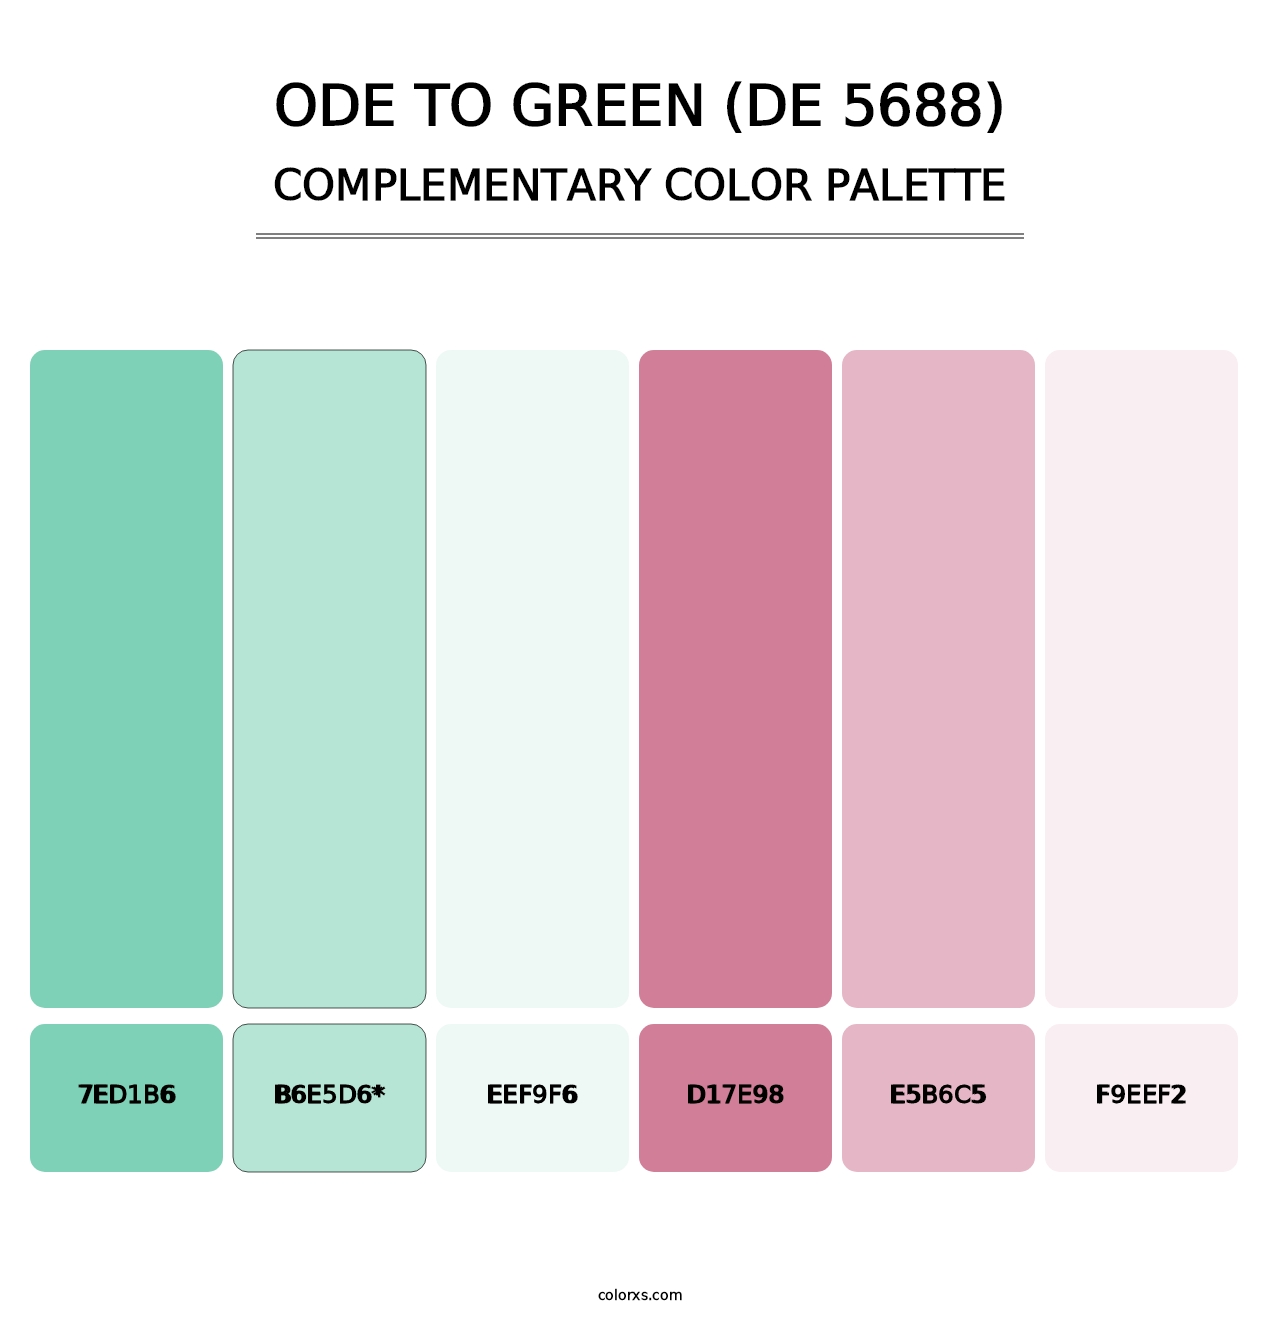 Ode to Green (DE 5688) - Complementary Color Palette